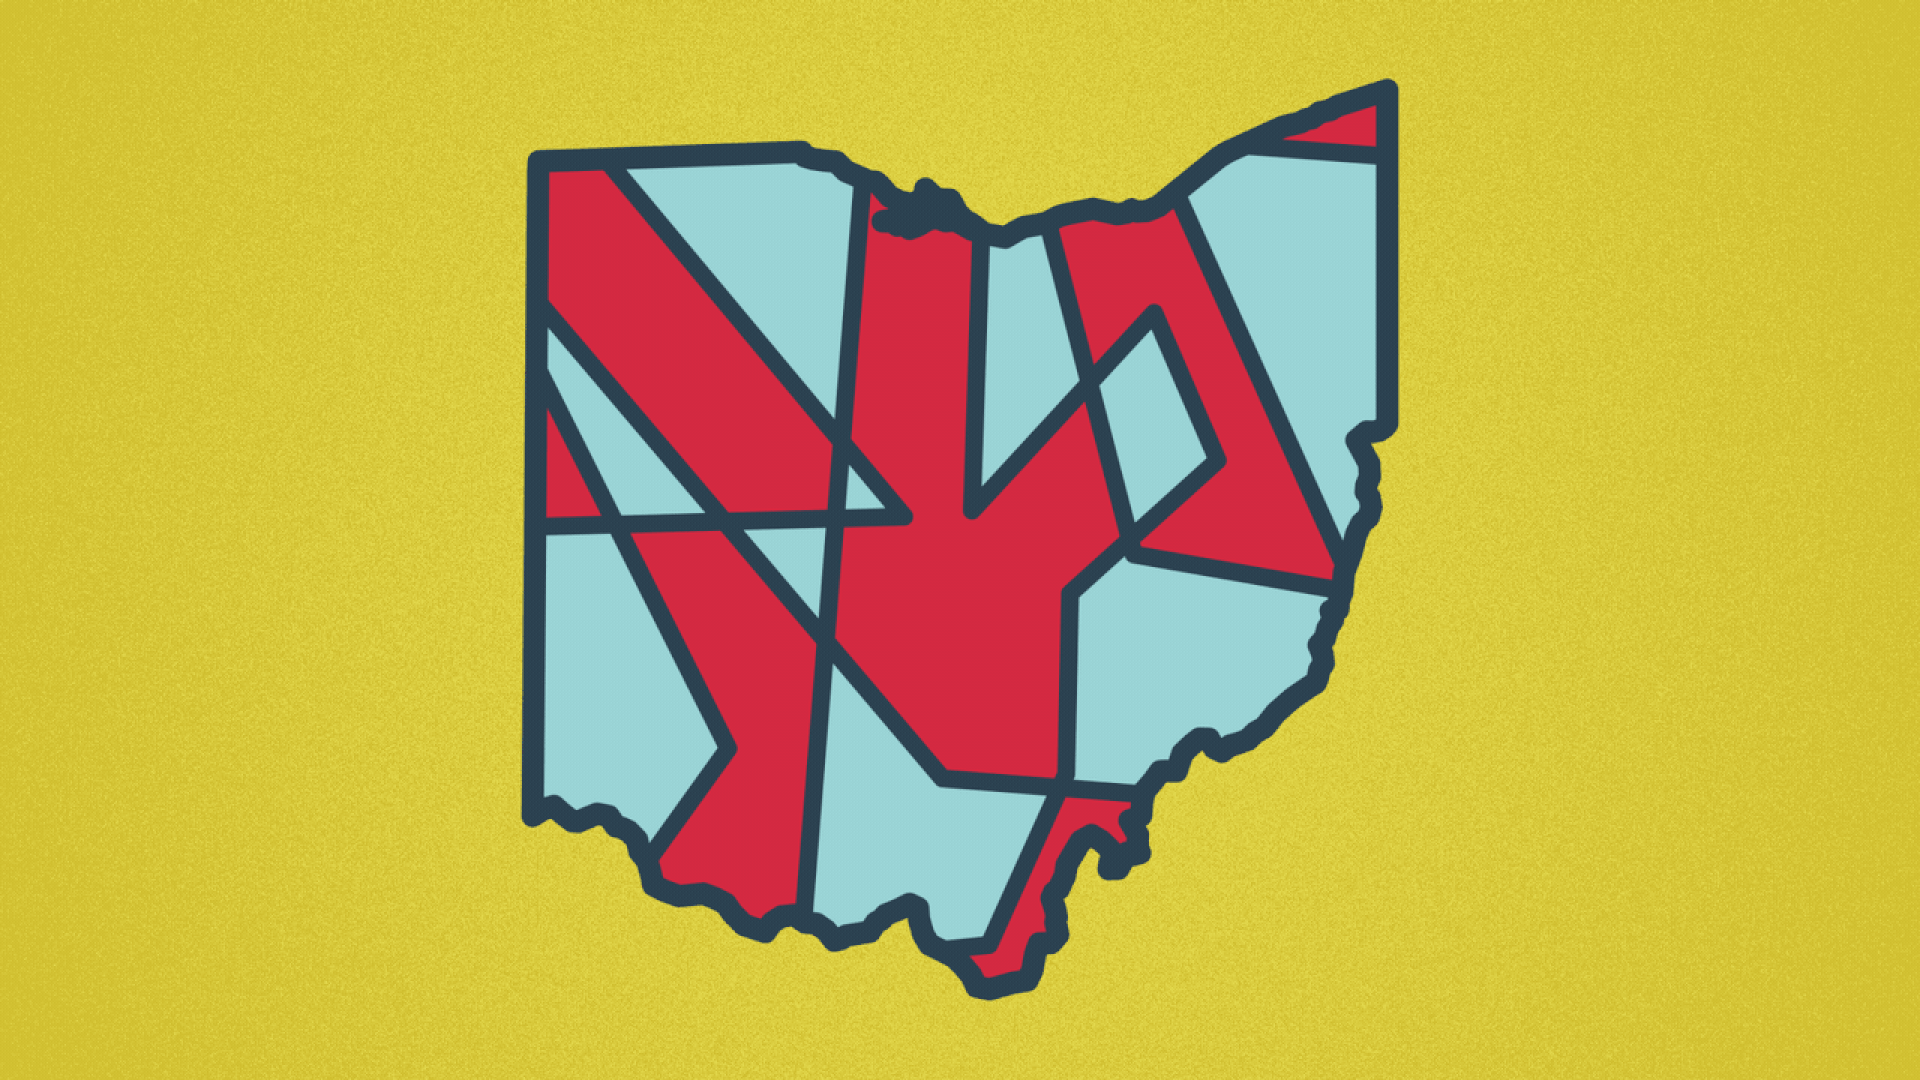 Illustration of the state of Ohio with moving districts inside it.